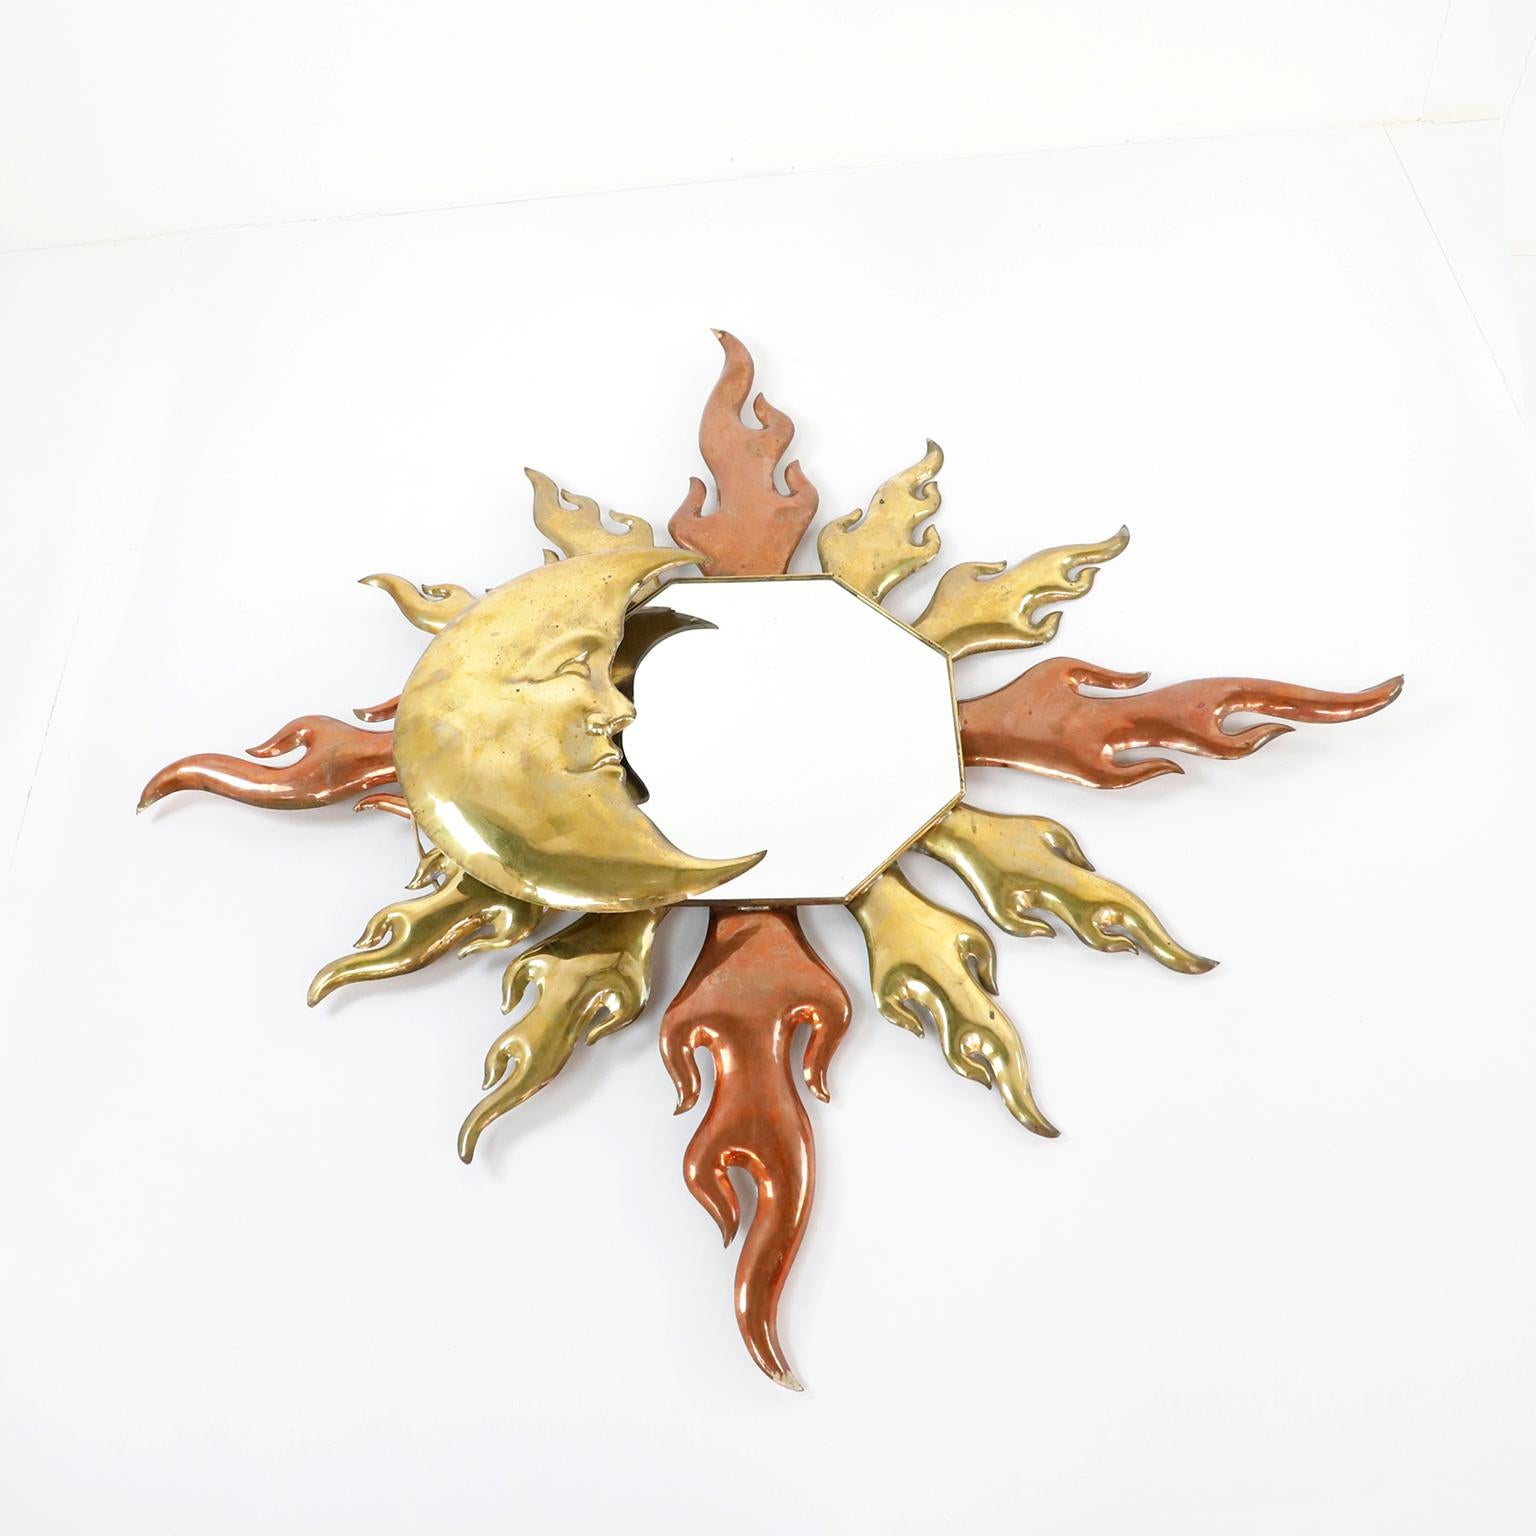 Circa 1970, we offer this Antique Mexican Artisanal Sun and Moon Mirror with light. Made in copper and brass details the mirror presents great patina.